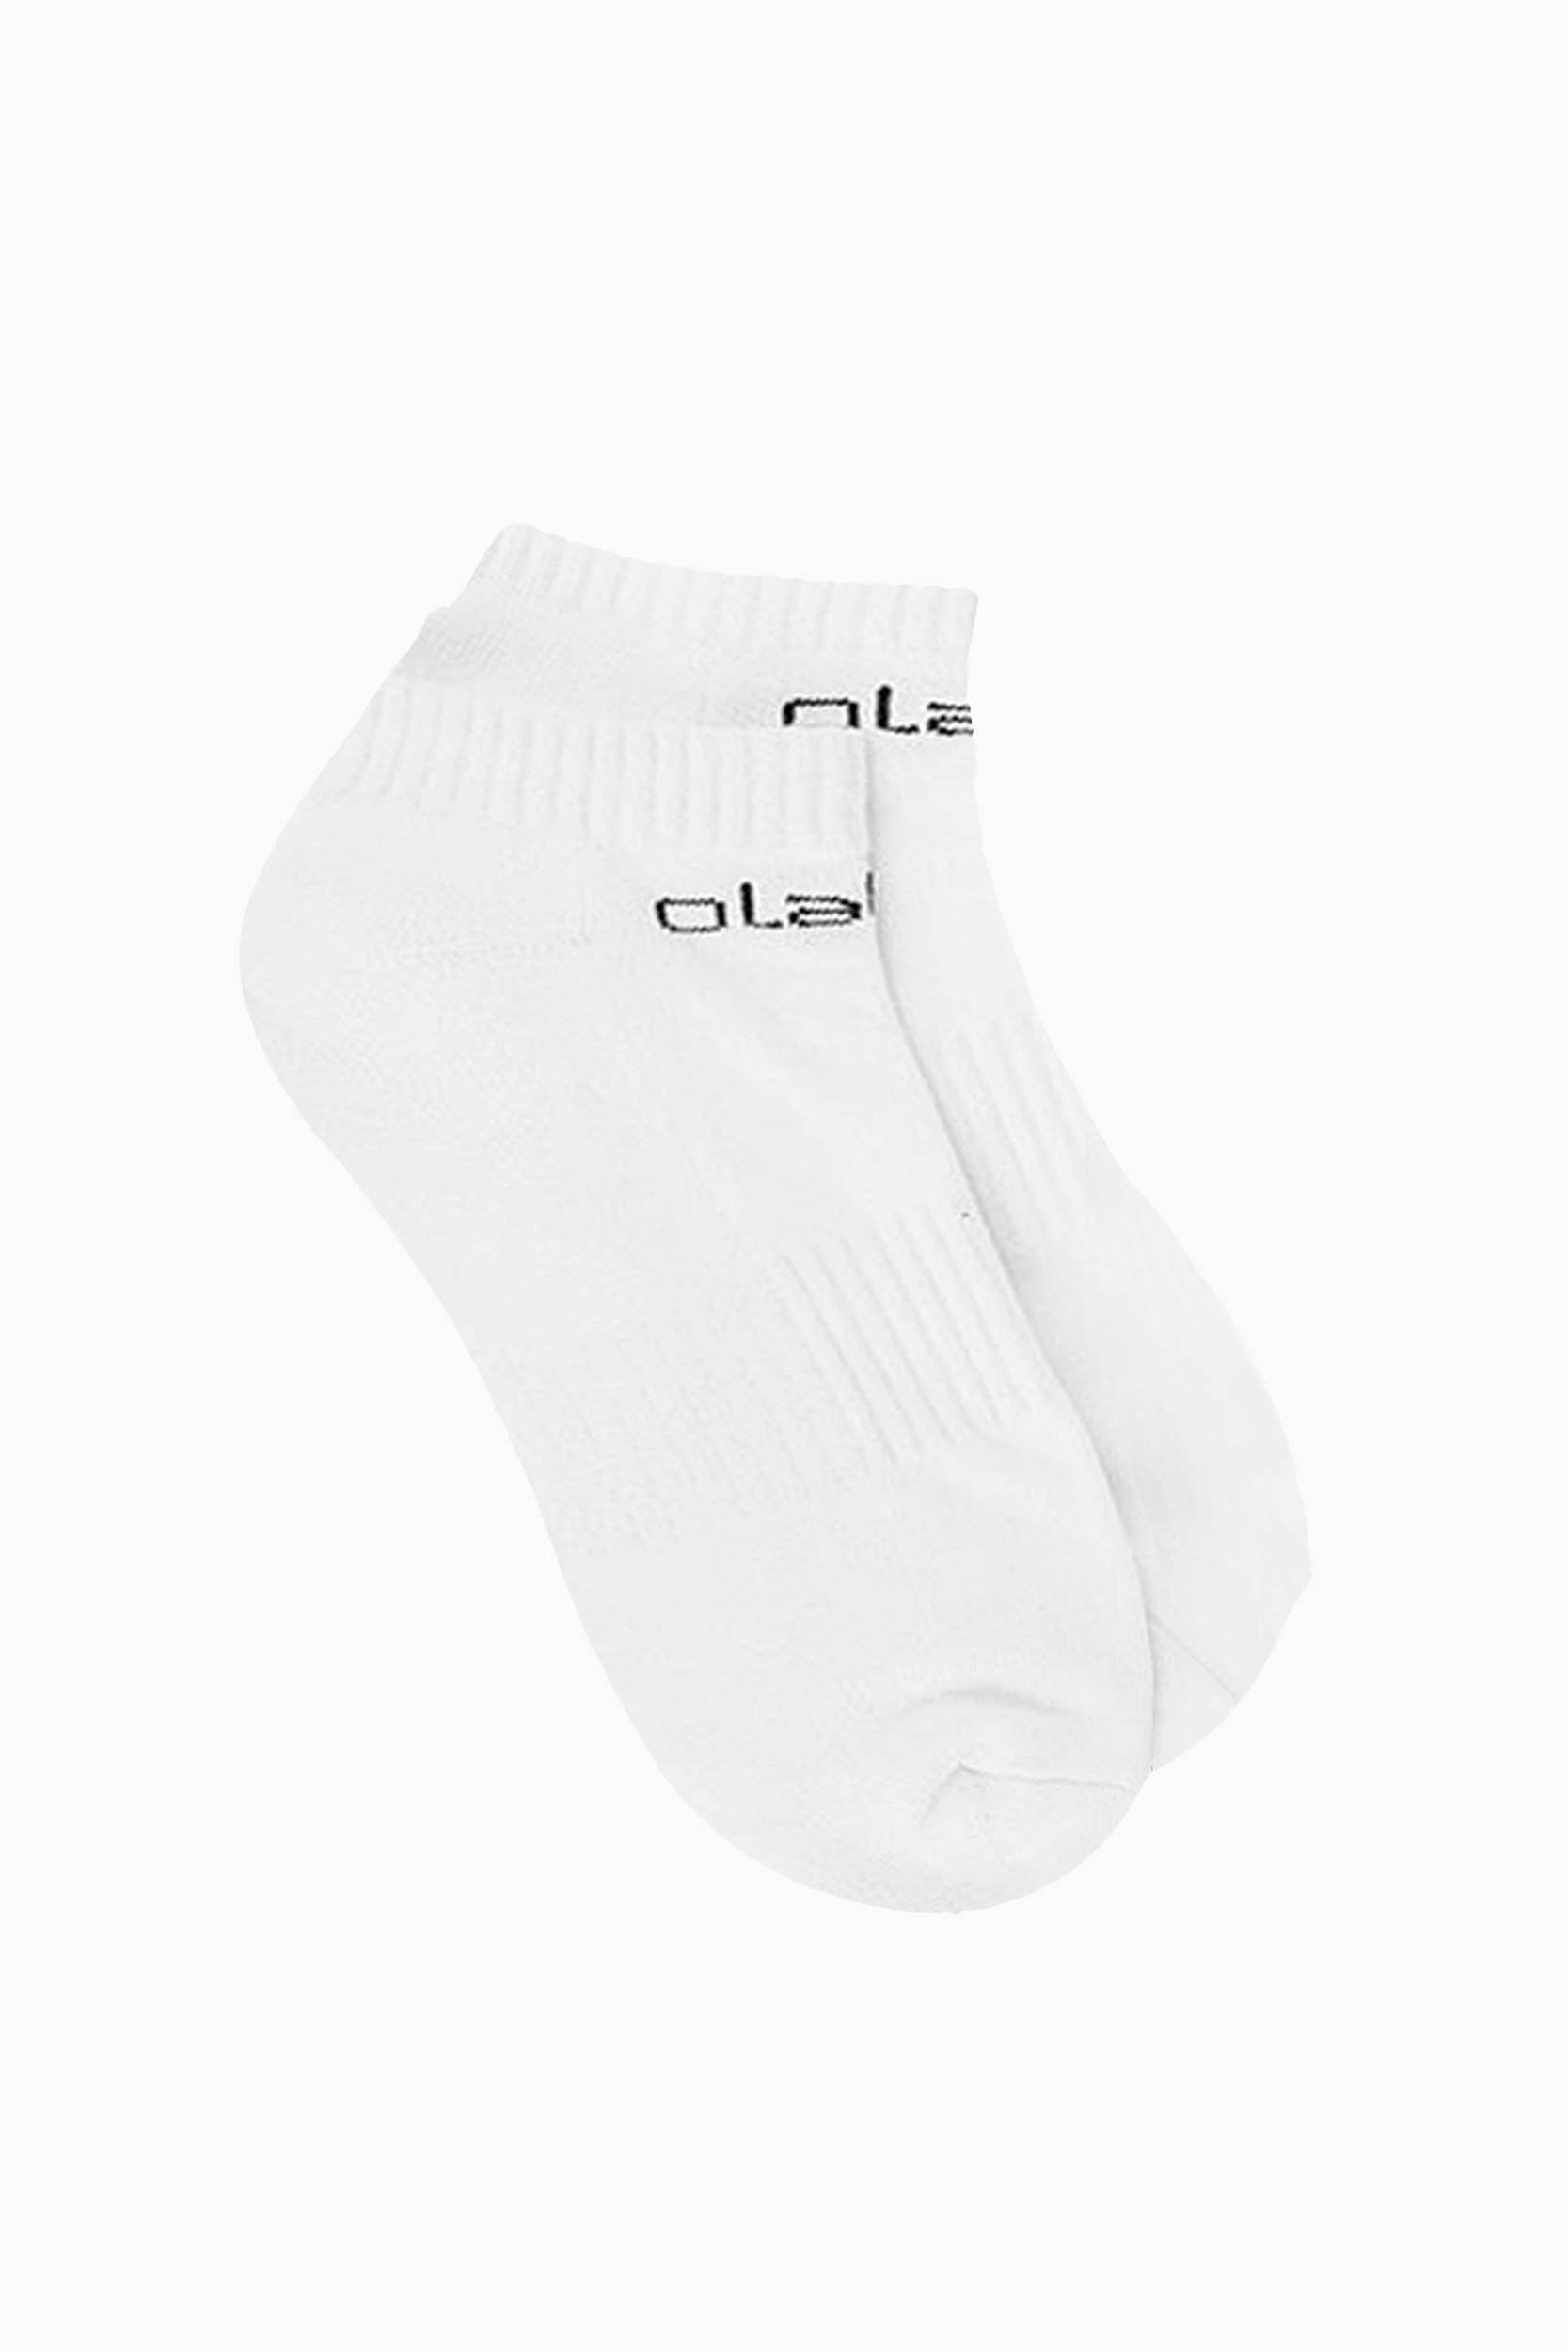 Pair of short white socks with kissy design, style OW-0152-USO-WT, in size 3.